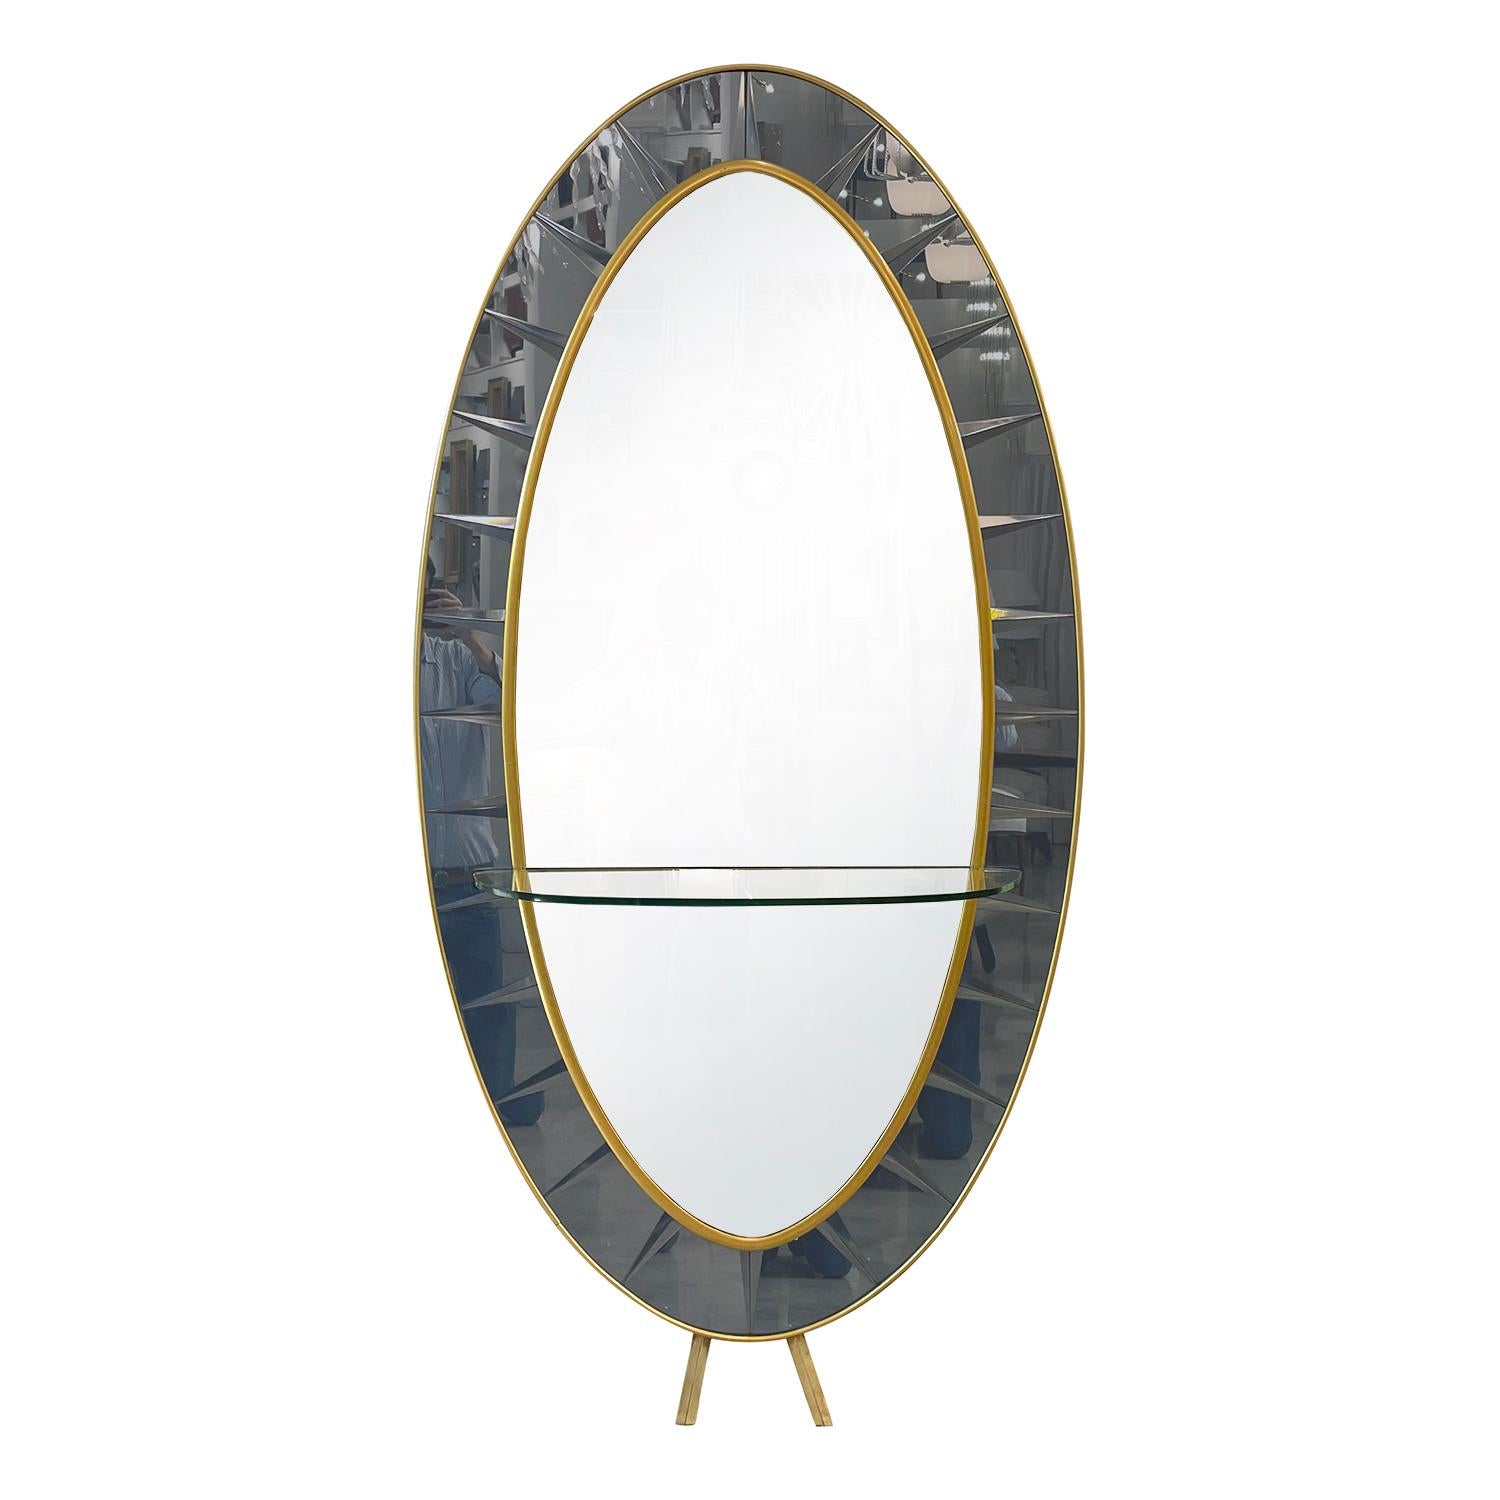 An oval, vintage Mid-Century modern Italian floor mirror made of hand blown cut crystal glass with its original mirrored glass, produced by Cristal Art in good condition. The wall décor piece is composed with a thick clear glass shelf,